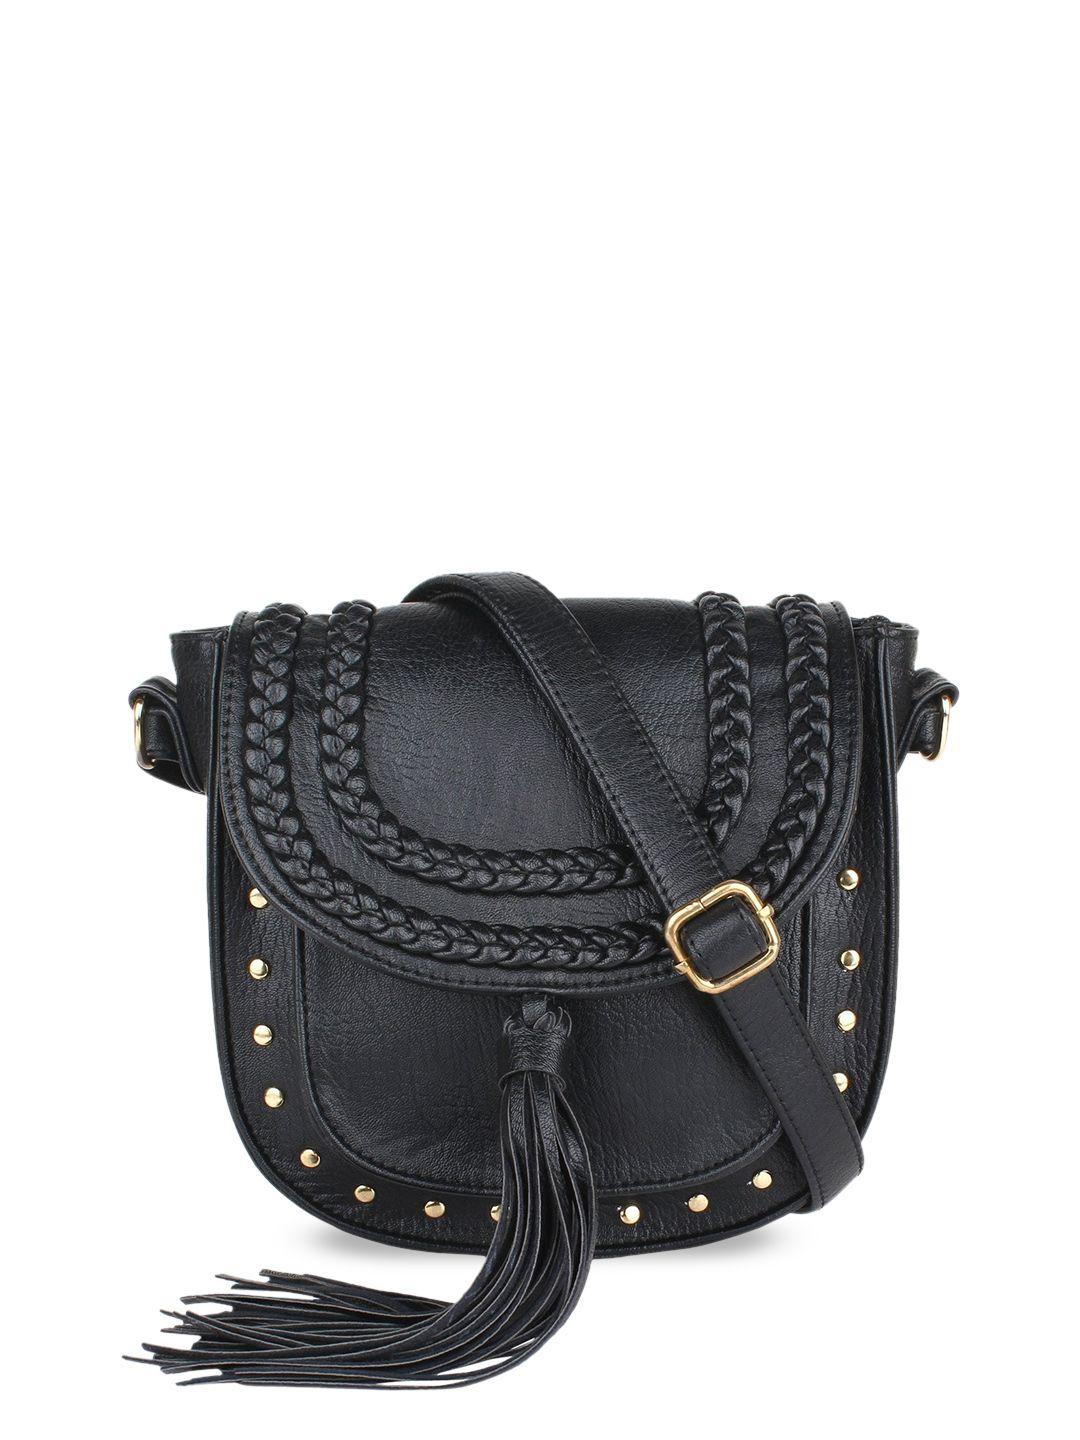 mast & harbour textured structured sling bag with tasselled